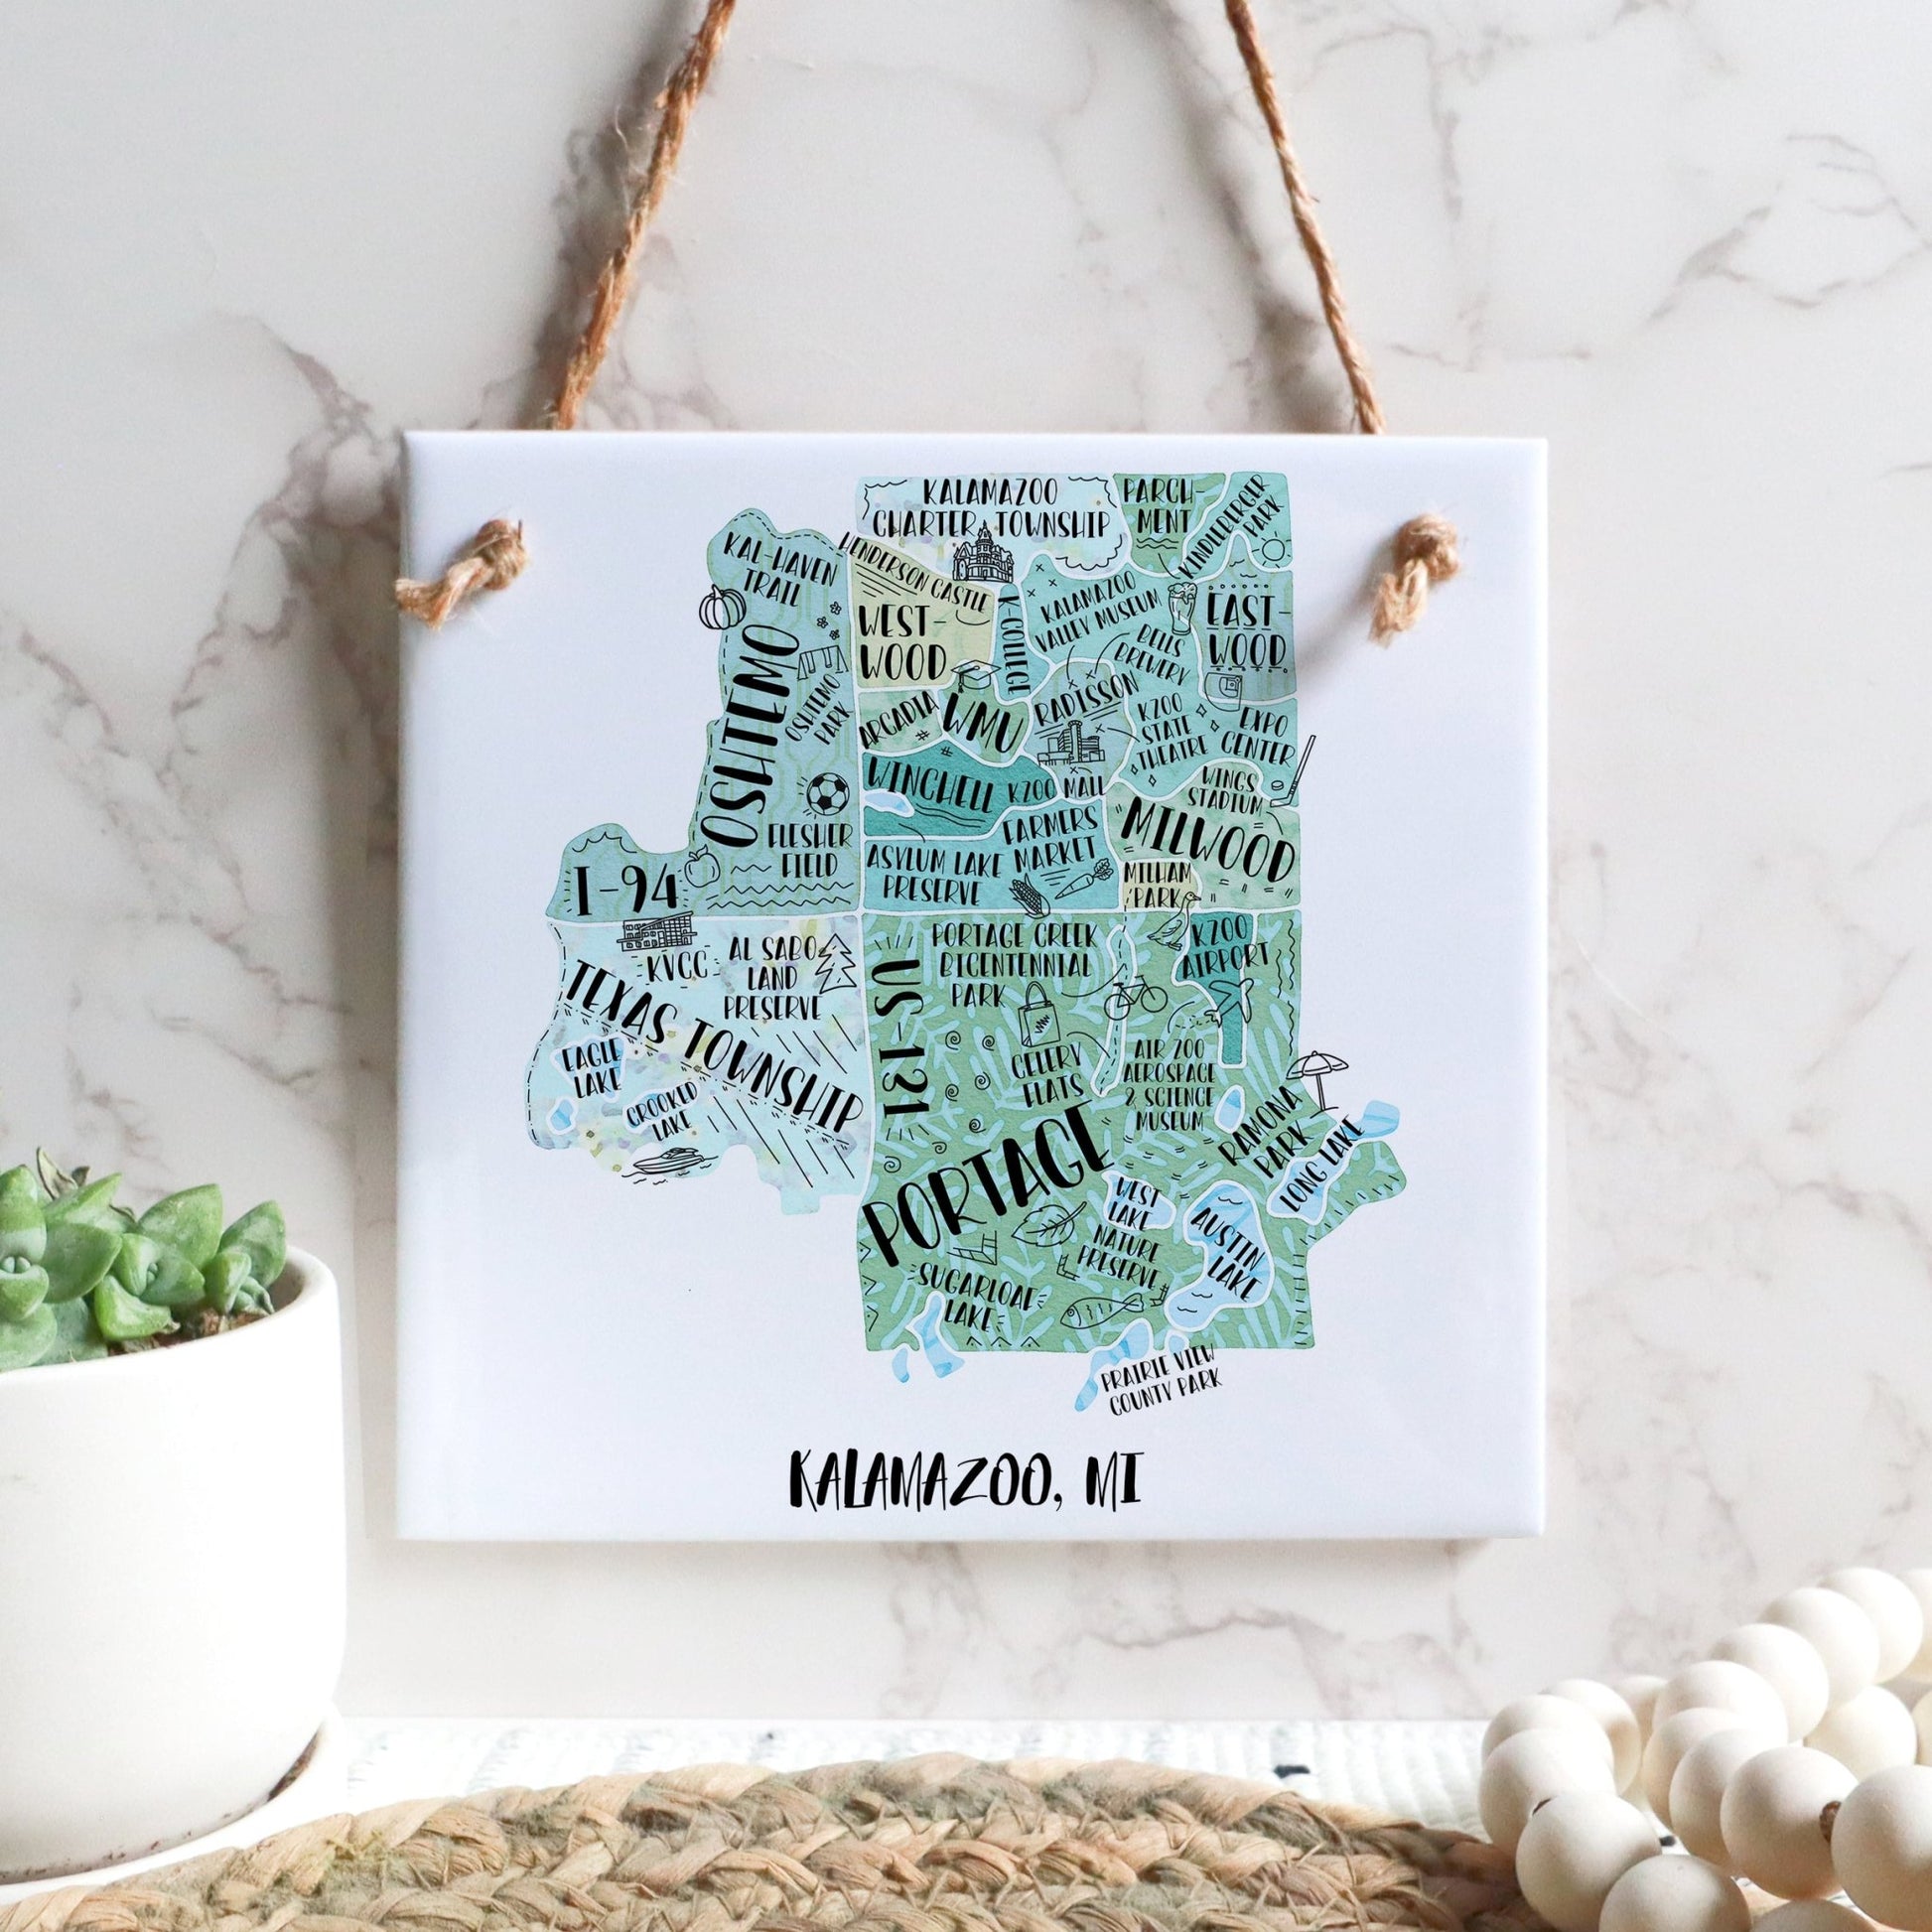 A hand-drawn tourist map of Kalamazoo MI on a square tile sign hanging on a wall - in the color teal